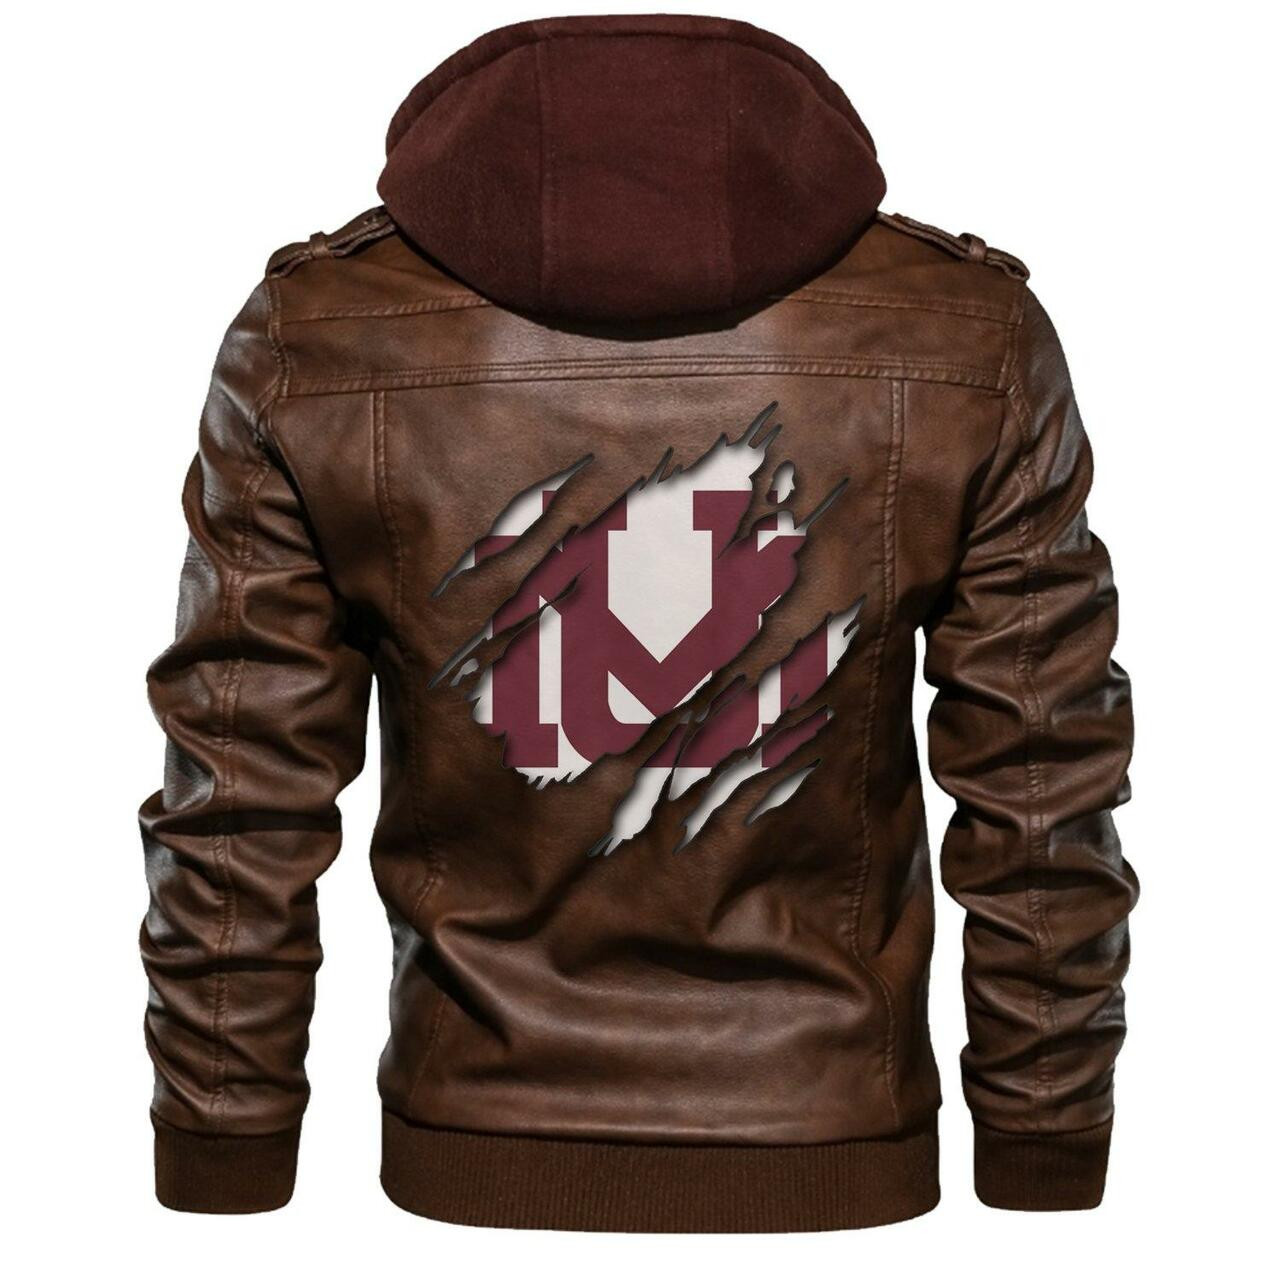 Our store has all of the latest leather jacket 27